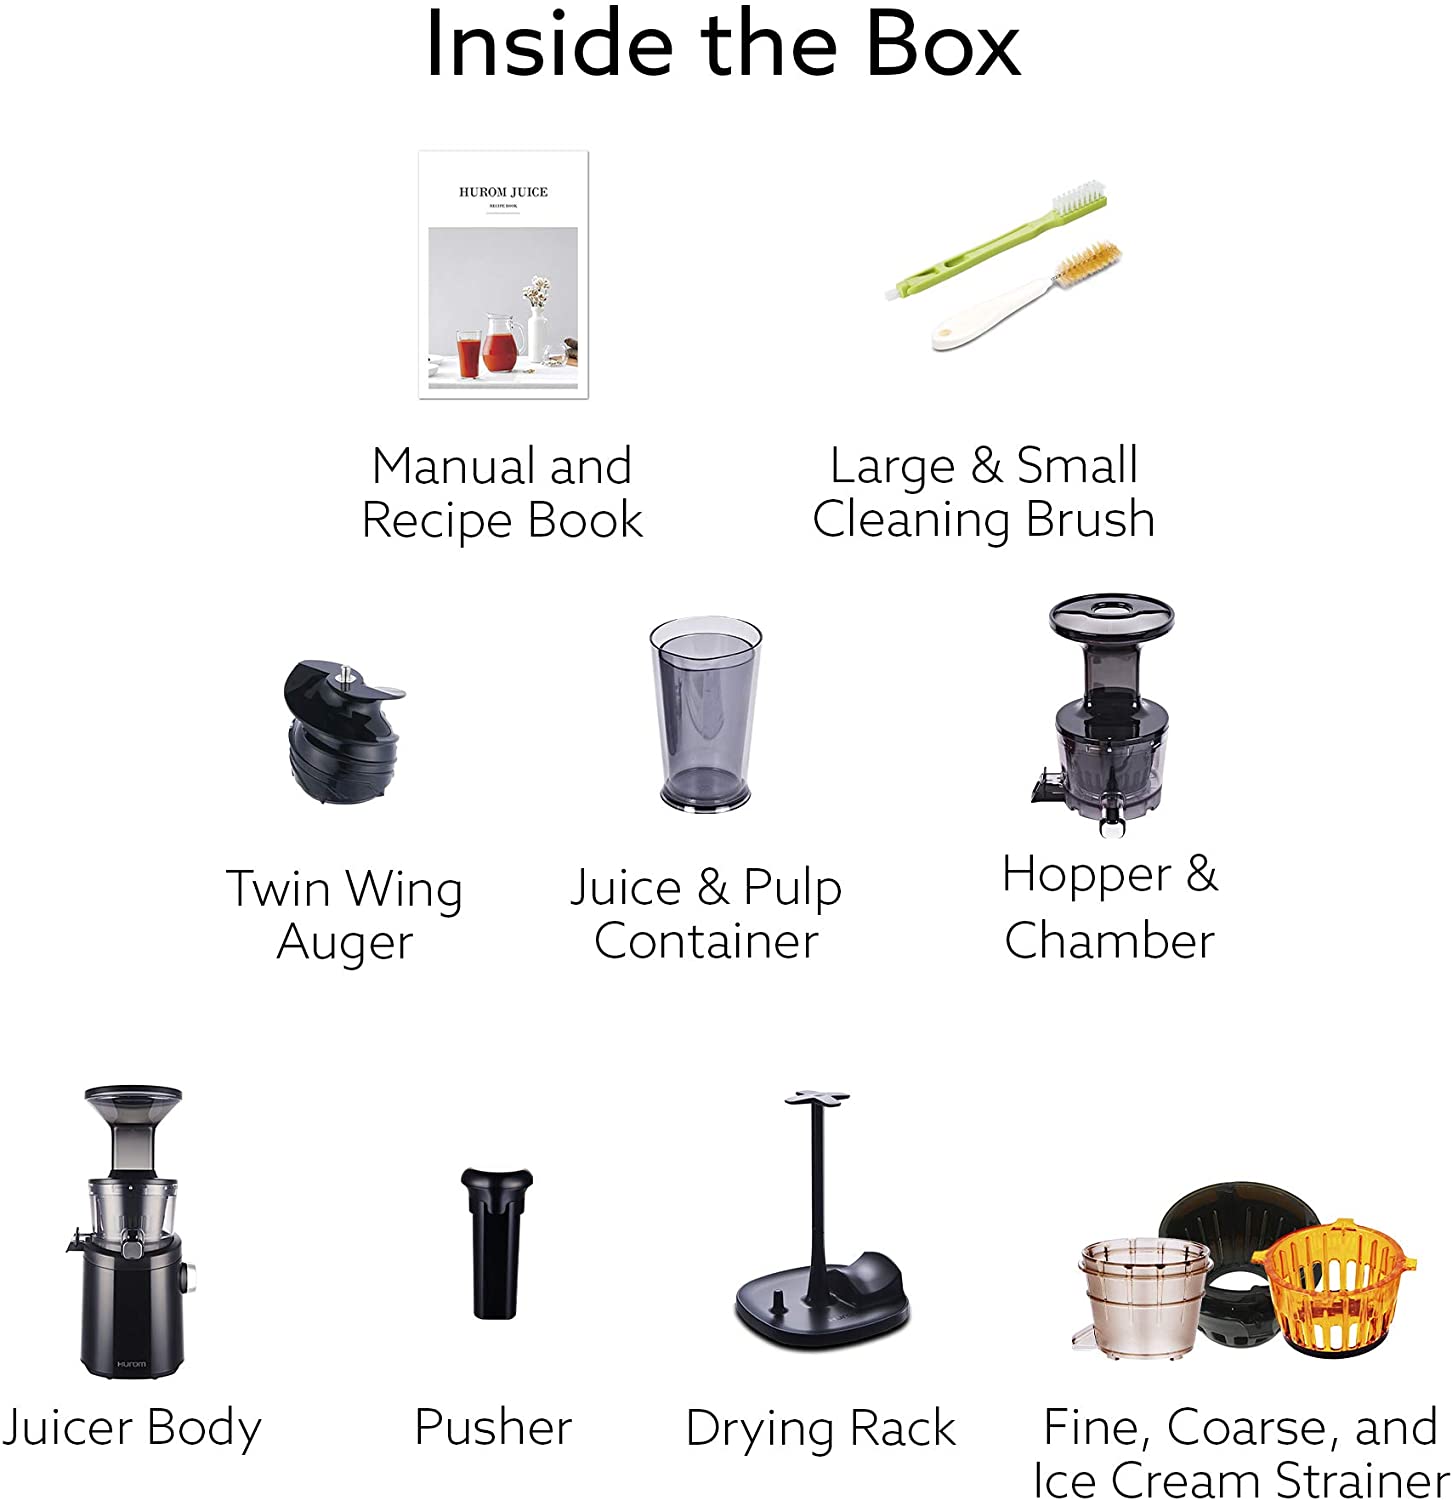 Inside-the-Box-Hurom-Juicer